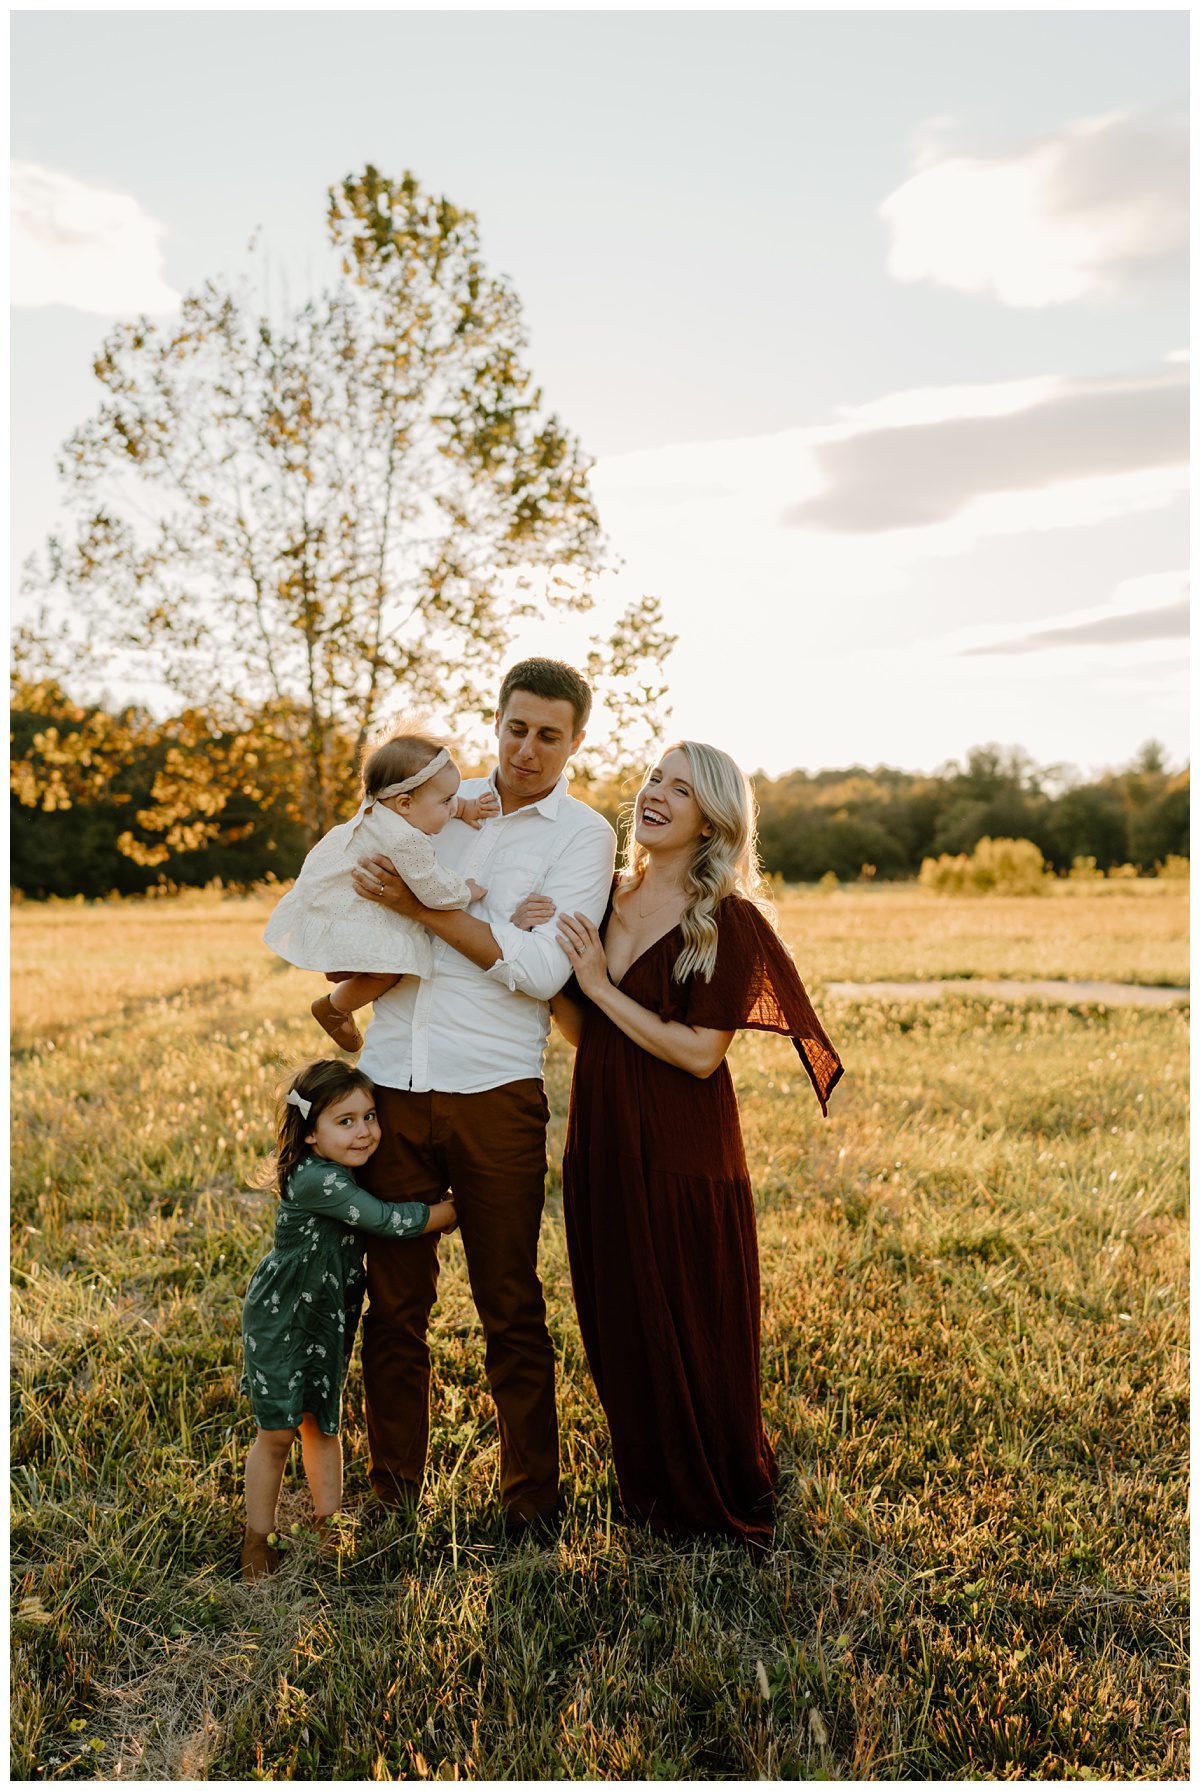 Glowy golden hour family portraits by Greensboro, NC photographer